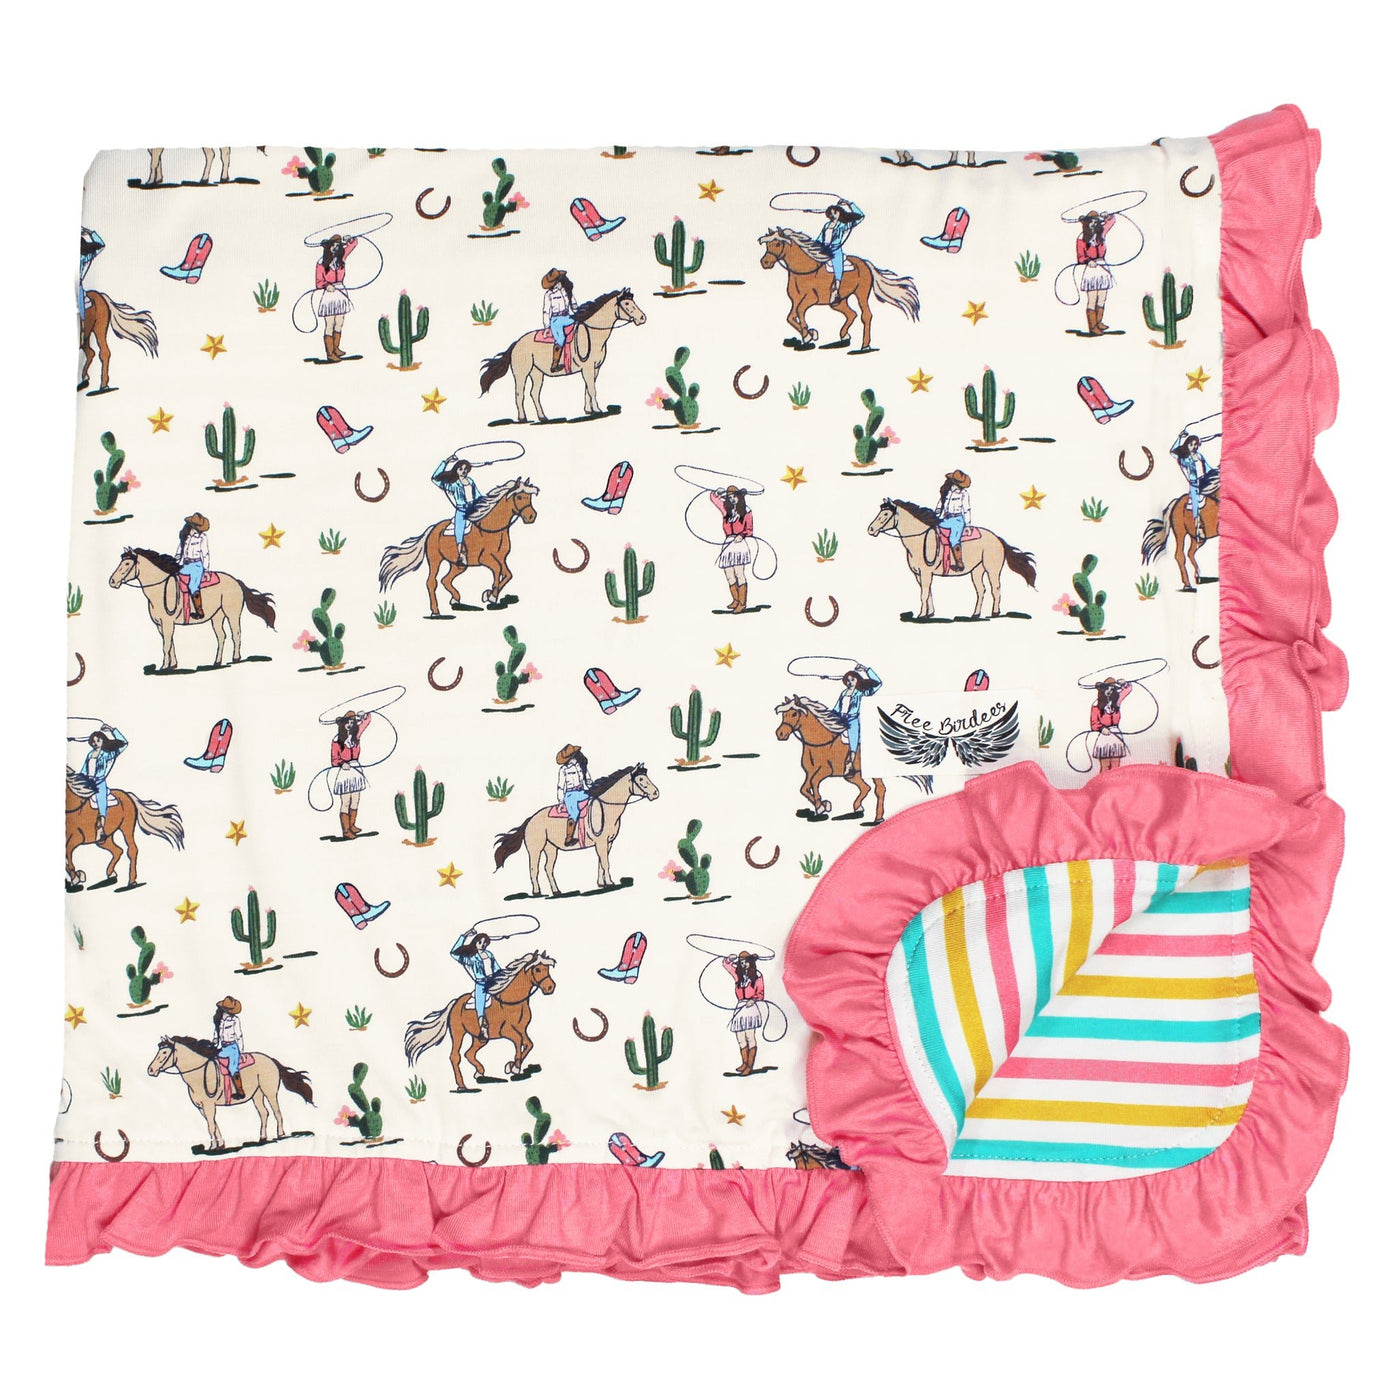 Dancing in My Boots Cowgirls Ruffle Toddler Blanket - Free Birdees